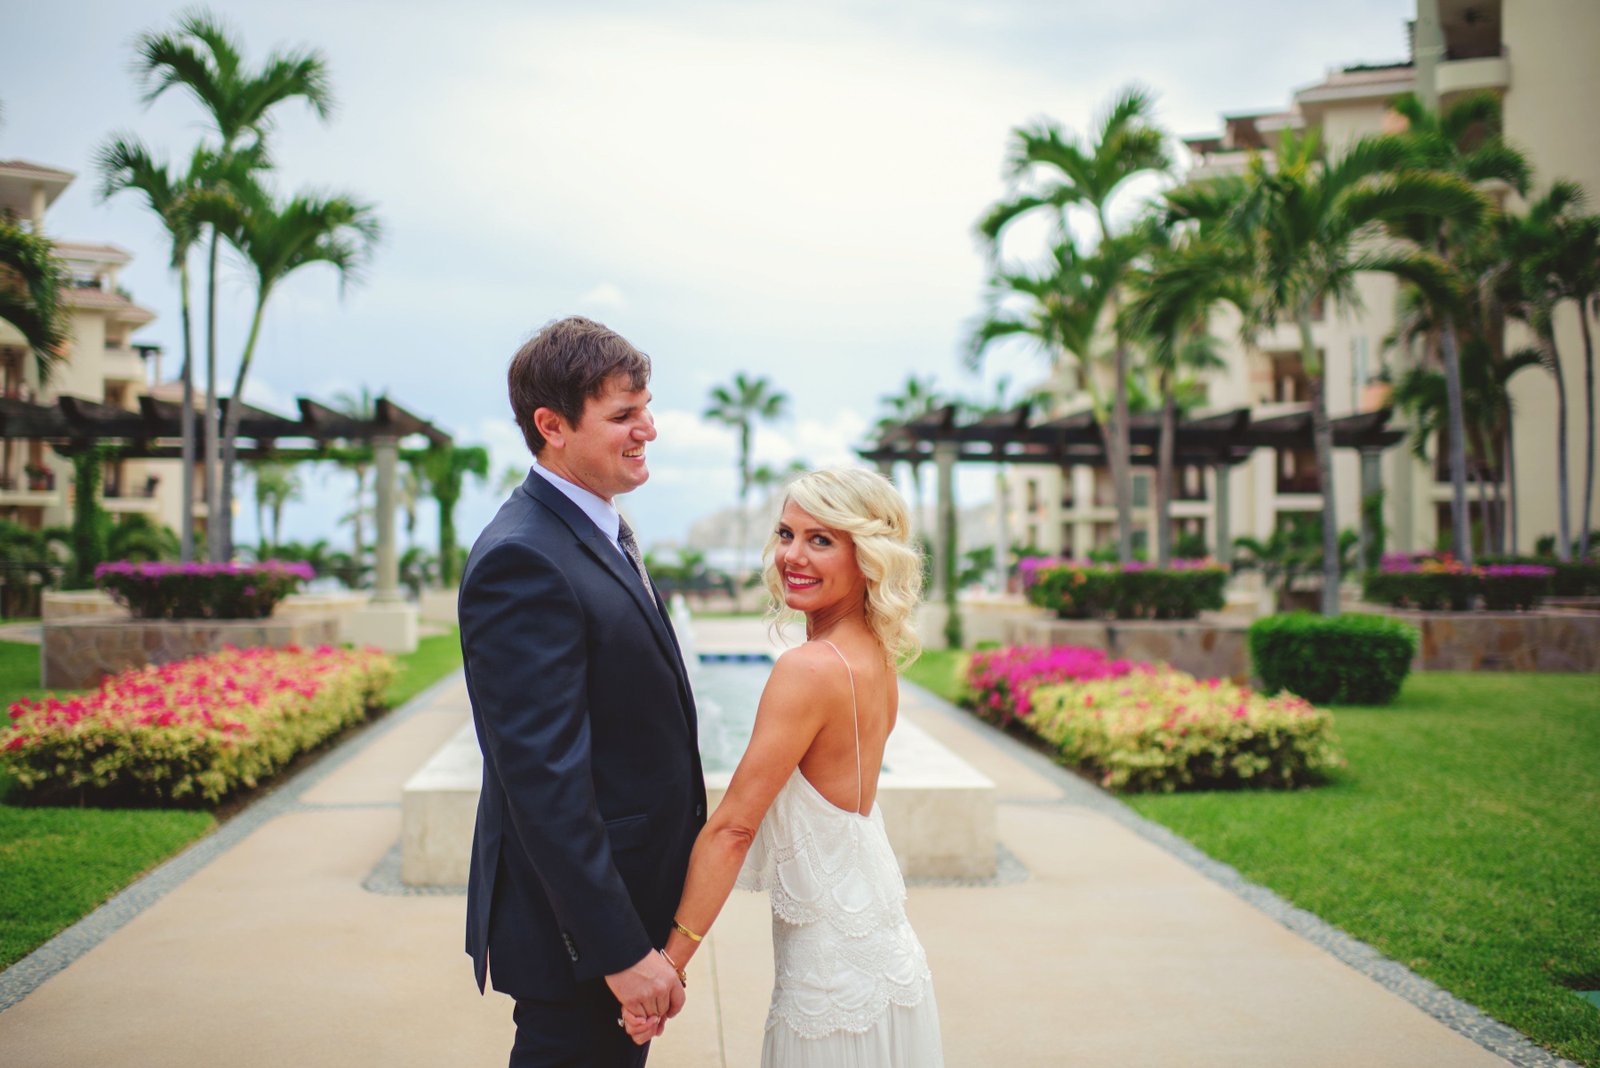 Bride and groom getting photo session at Villa de la Estancia in Cabo San Lucas, Mexico, right before their Wedding Ceremony at their Destination Wedding in Mexico. Wedding Planning by Cabo Wedding Services.